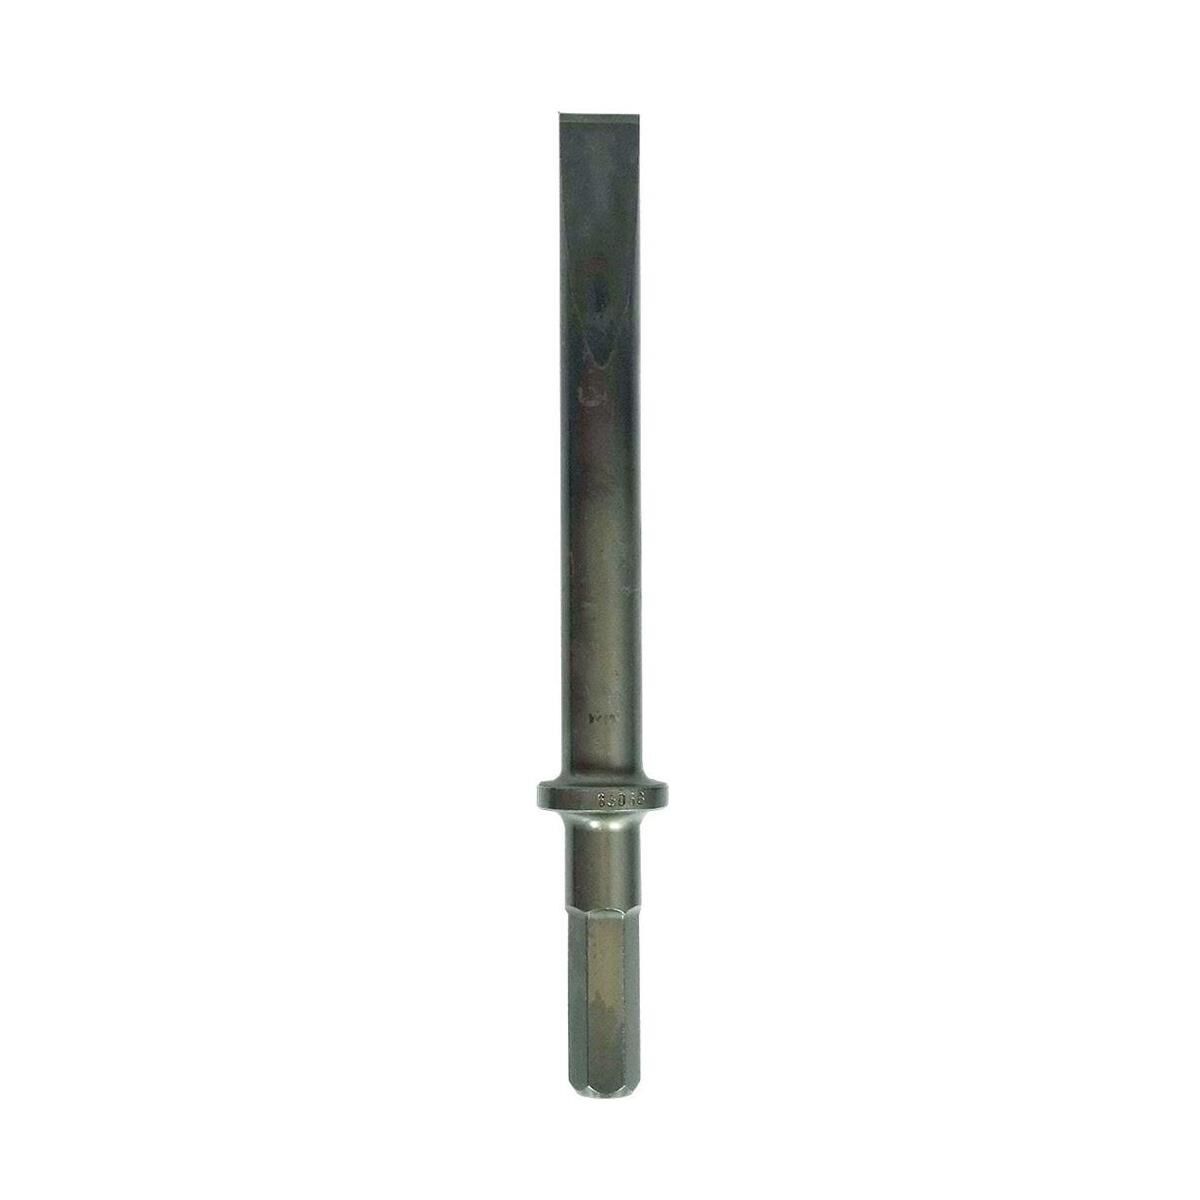 Chicago Pneumatic FLACHMEISSEL 16MM